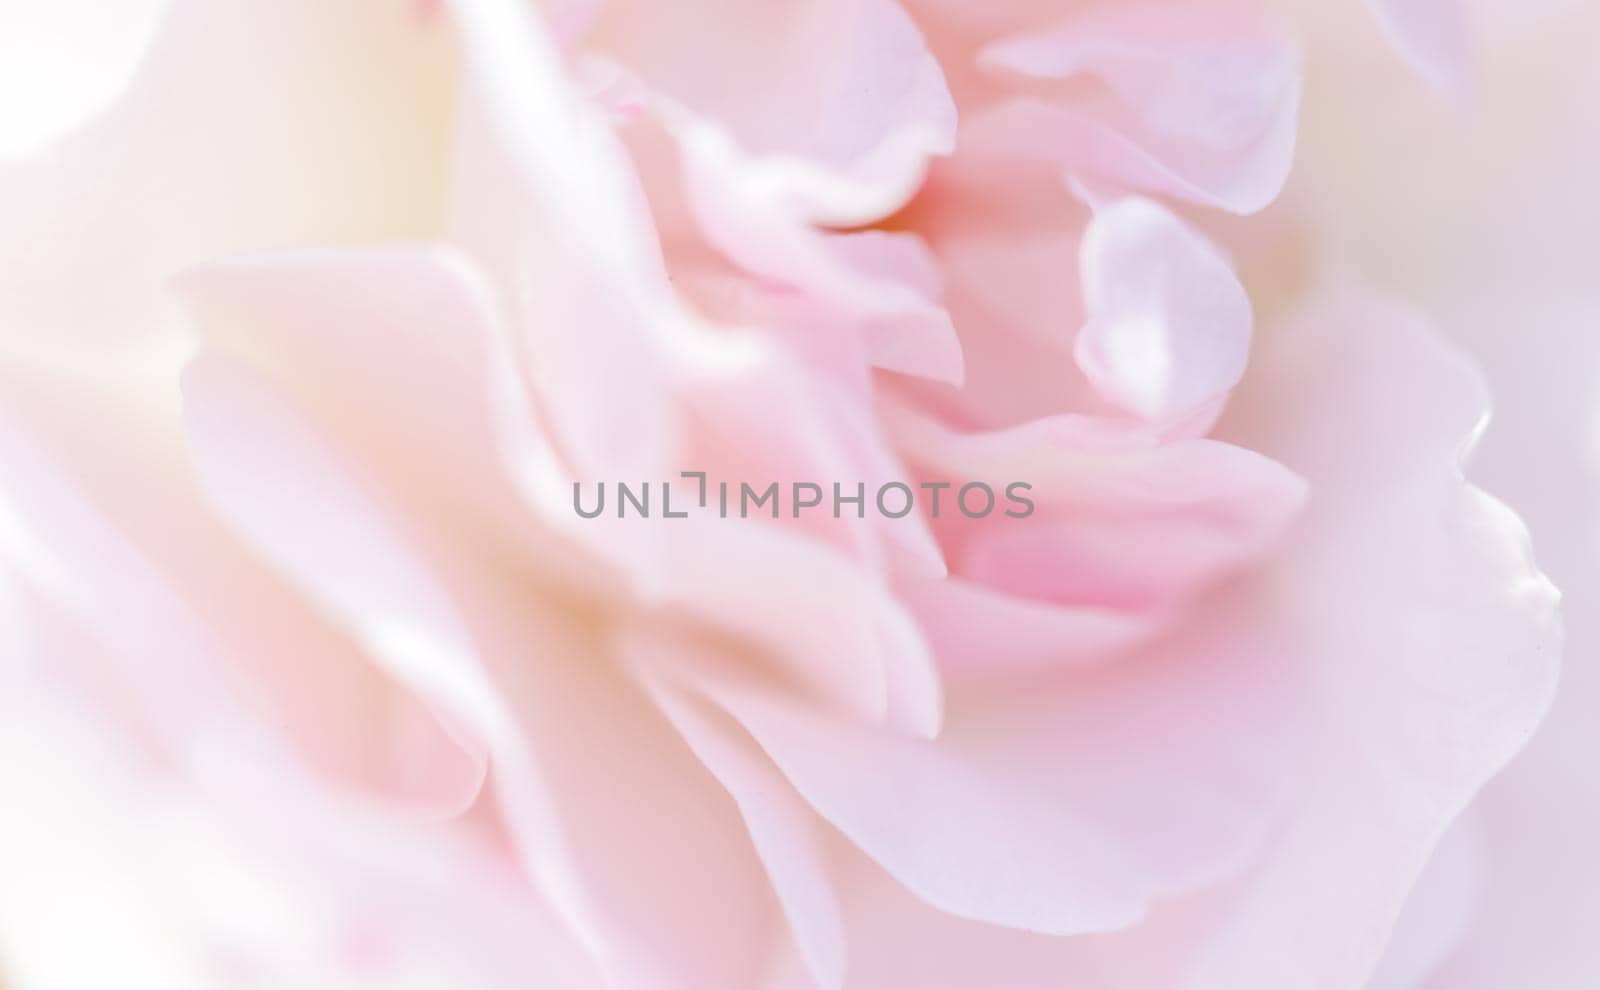 Botanical concept, wedding invitation card - Soft focus, abstract floral background, pale pink rose flower petals. Macro flowers backdrop for holiday brand design